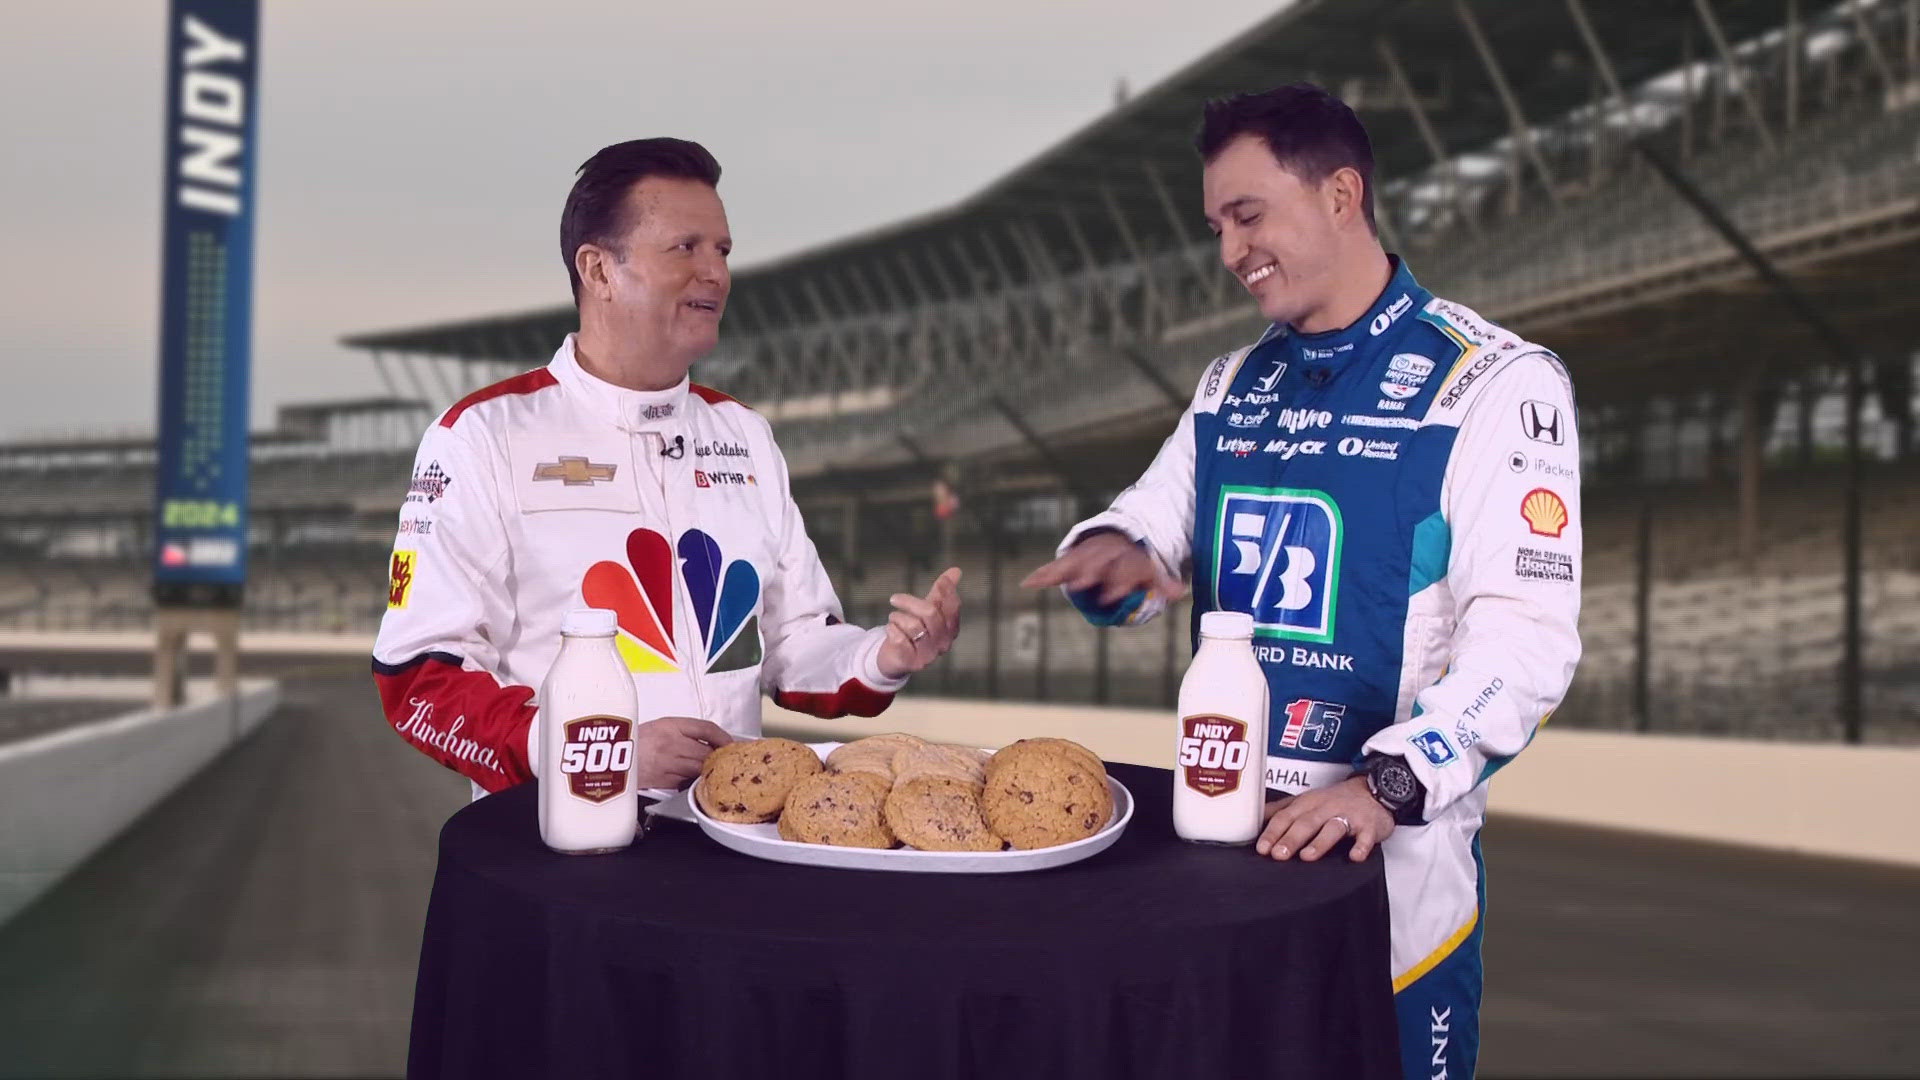 13Sports director Dave Calabro talks with Graham Rahal, Josef Newgarden, Sting Ray Robb, Scott Dixon, Colton Herta, Ed Carpenter and more about life off the track.